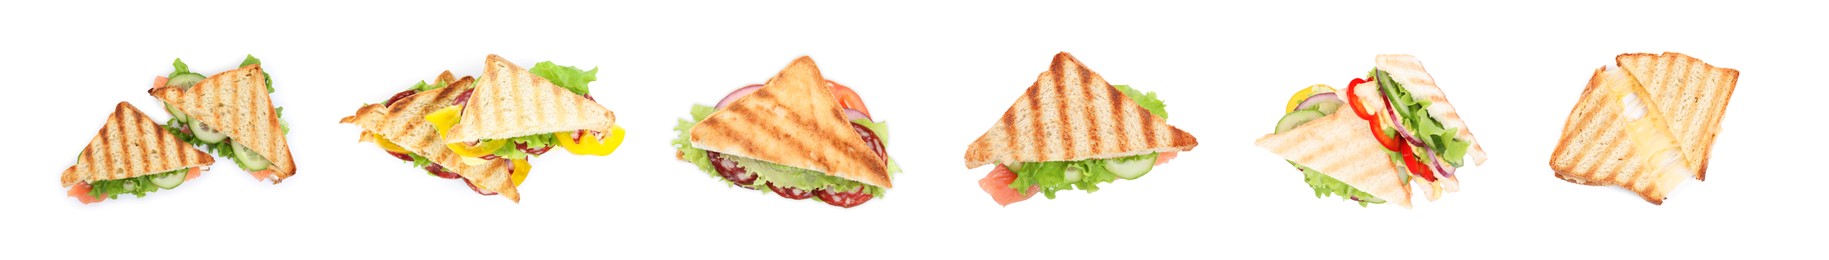 Set with different delicious sandwiches on white background. Banner design